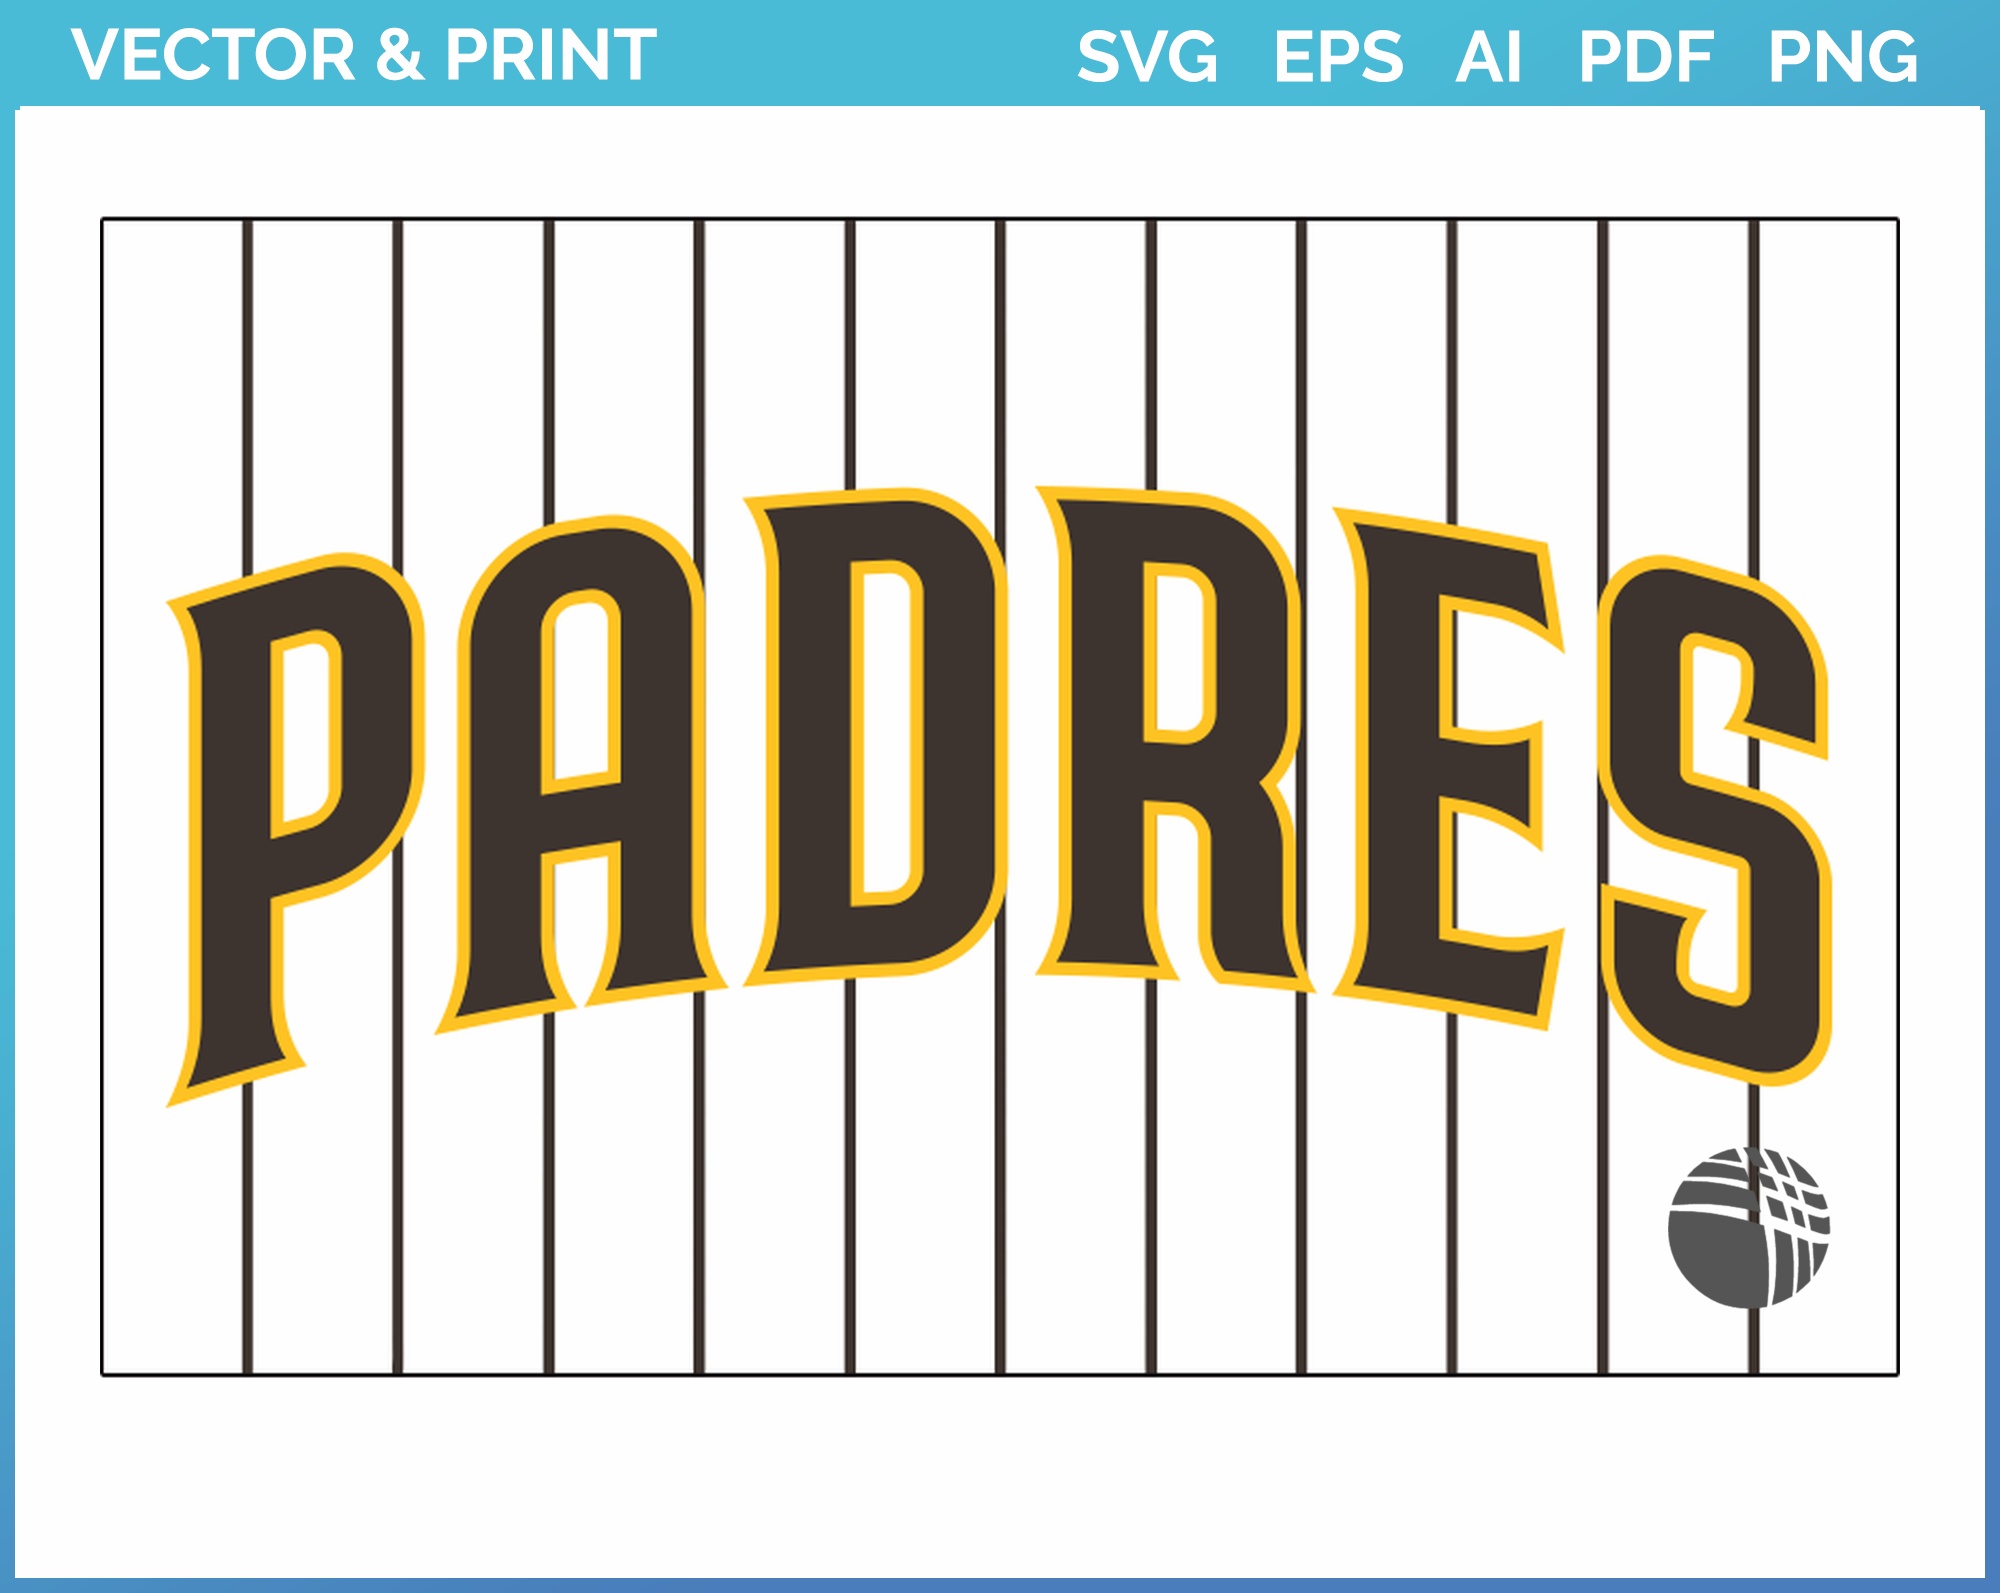 Padres Jersey -  New Zealand